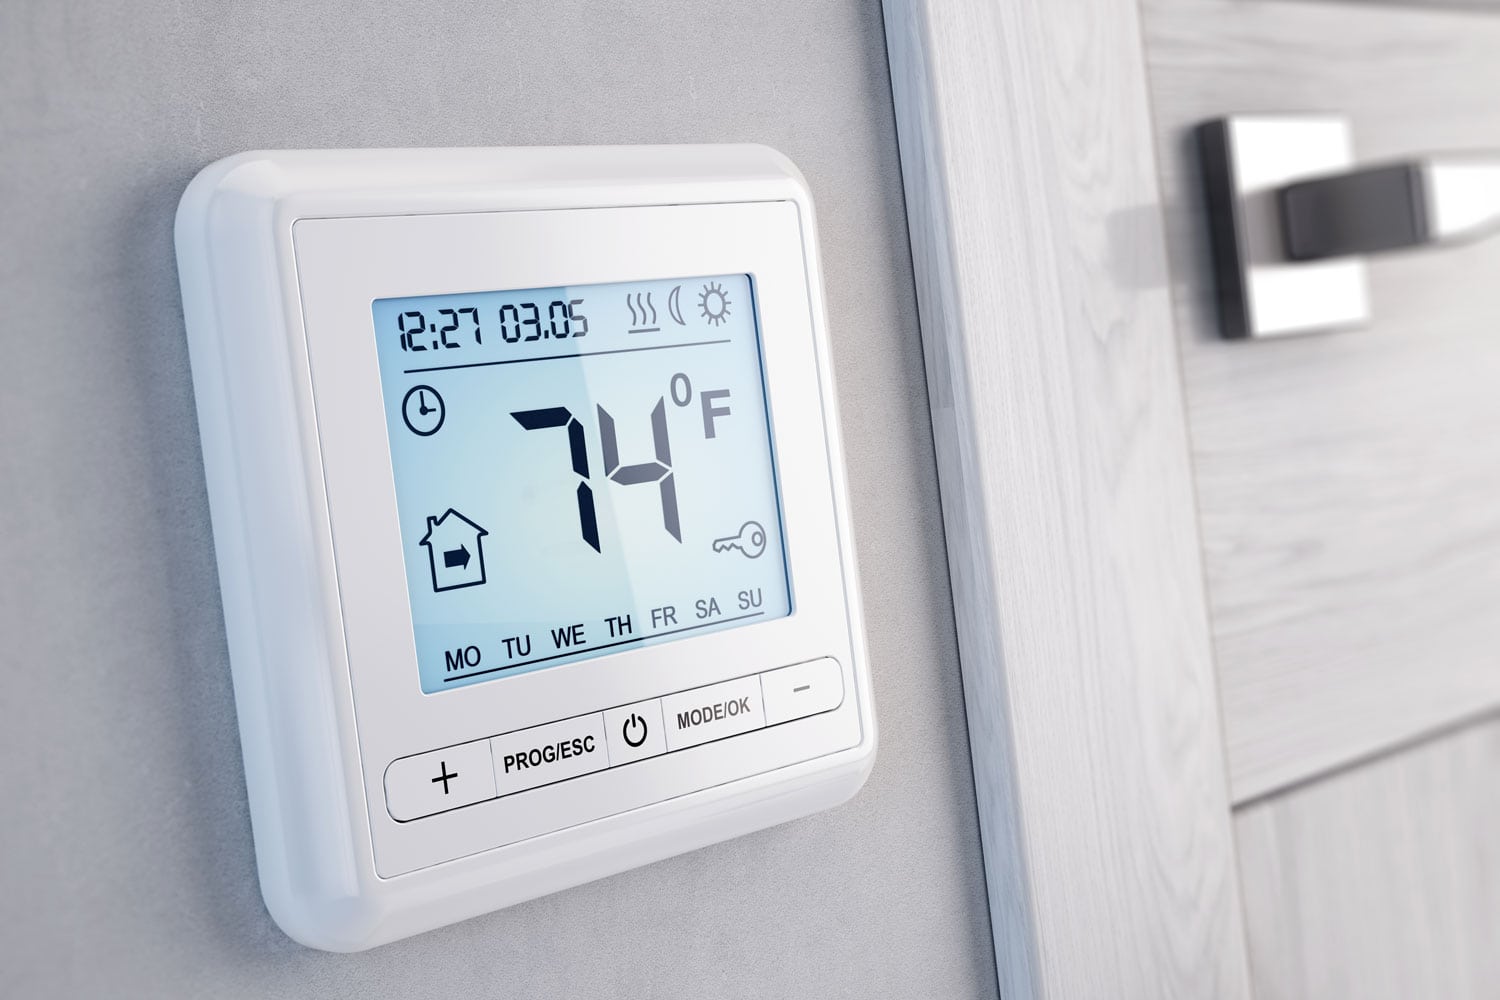 A thermostat set to 74 degrees